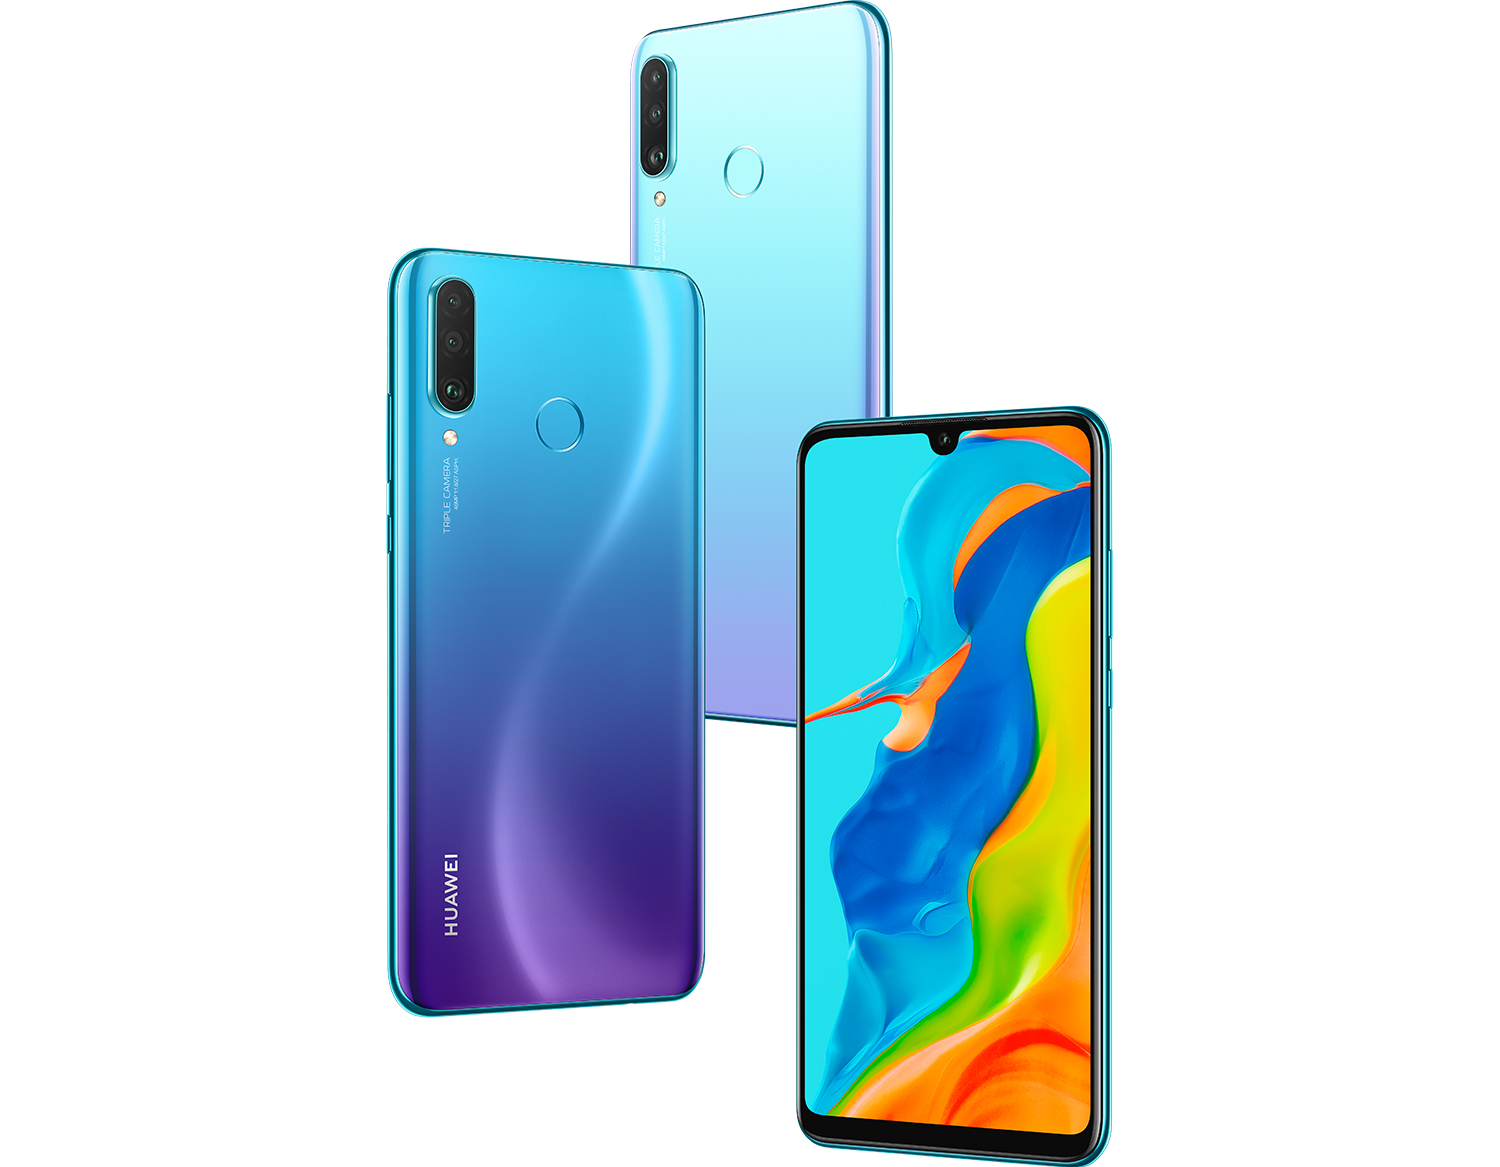 Persona prieel papier Huawei P30 Lite New Edition Smartphone Review – High-End Memory -  NotebookCheck.net Reviews